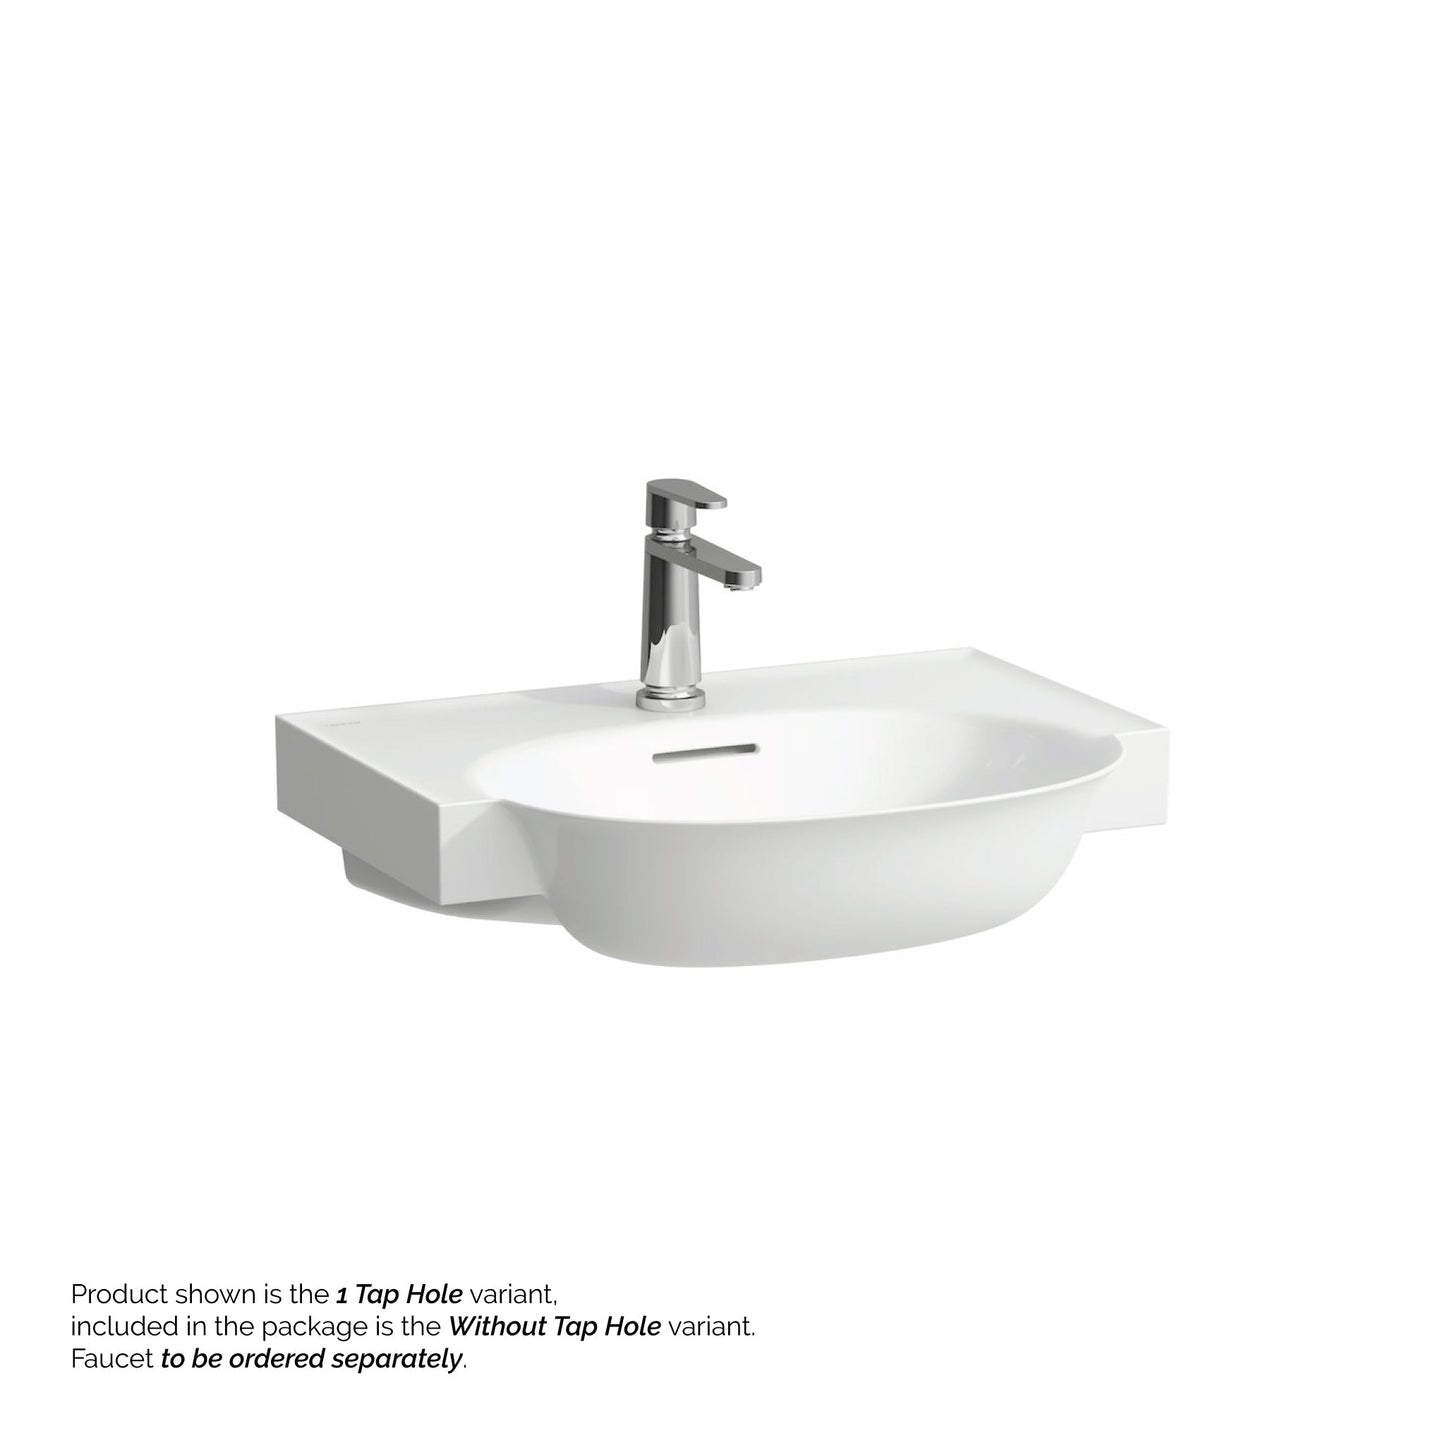 Laufen New Classic 24" x 19" Matte White Ceramic Wall-Mounted Bathroom Sink Without Faucet Hole